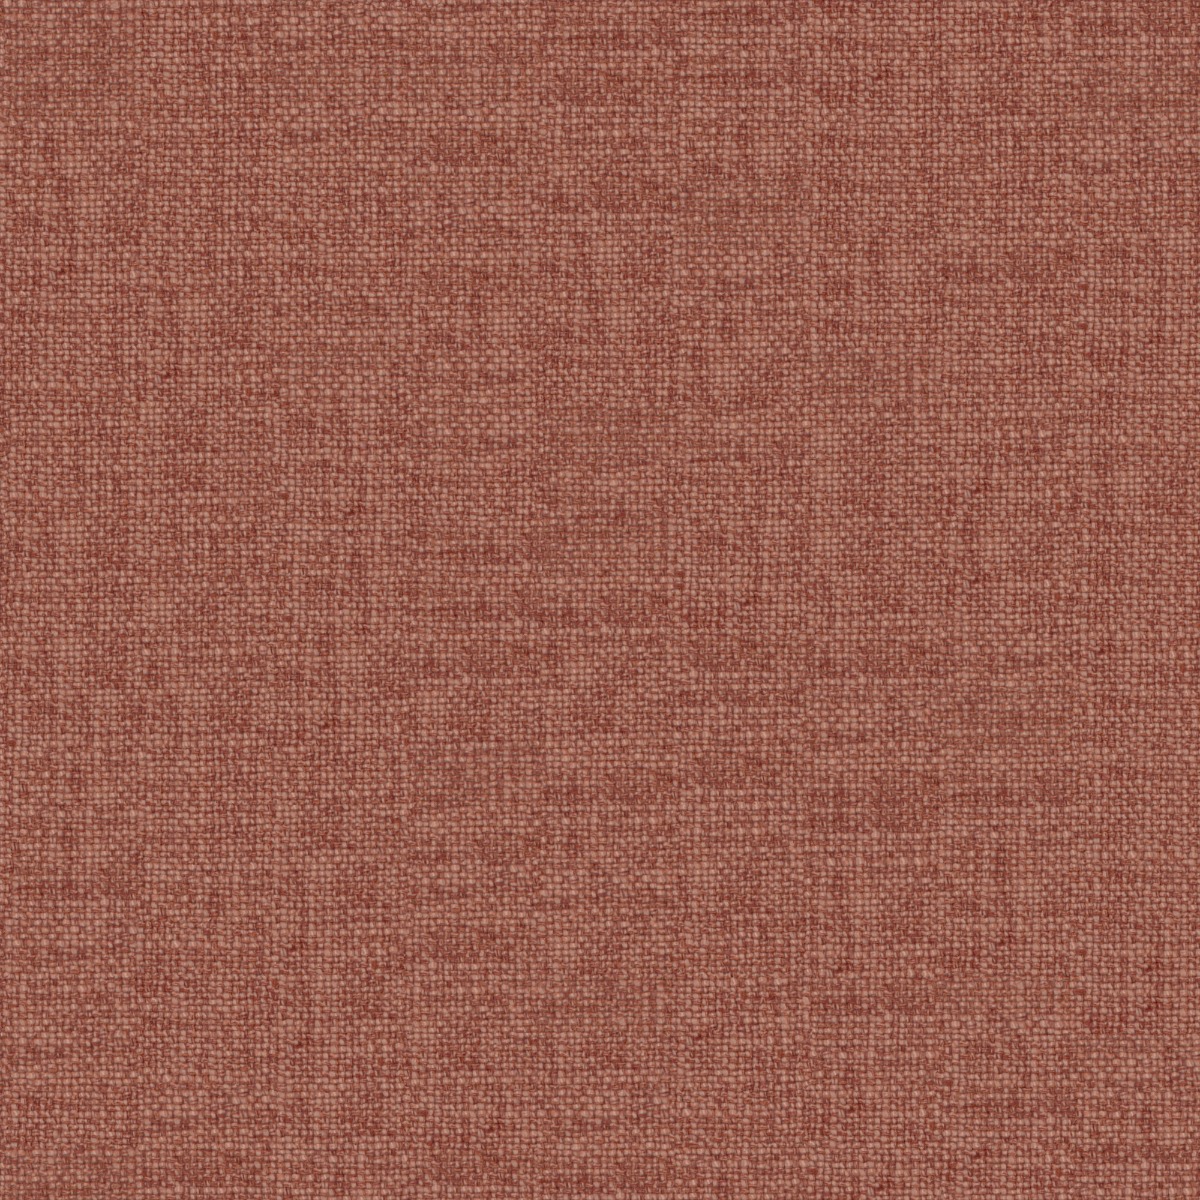 A seamless fabric texture with plain orange texture units arranged in a None pattern